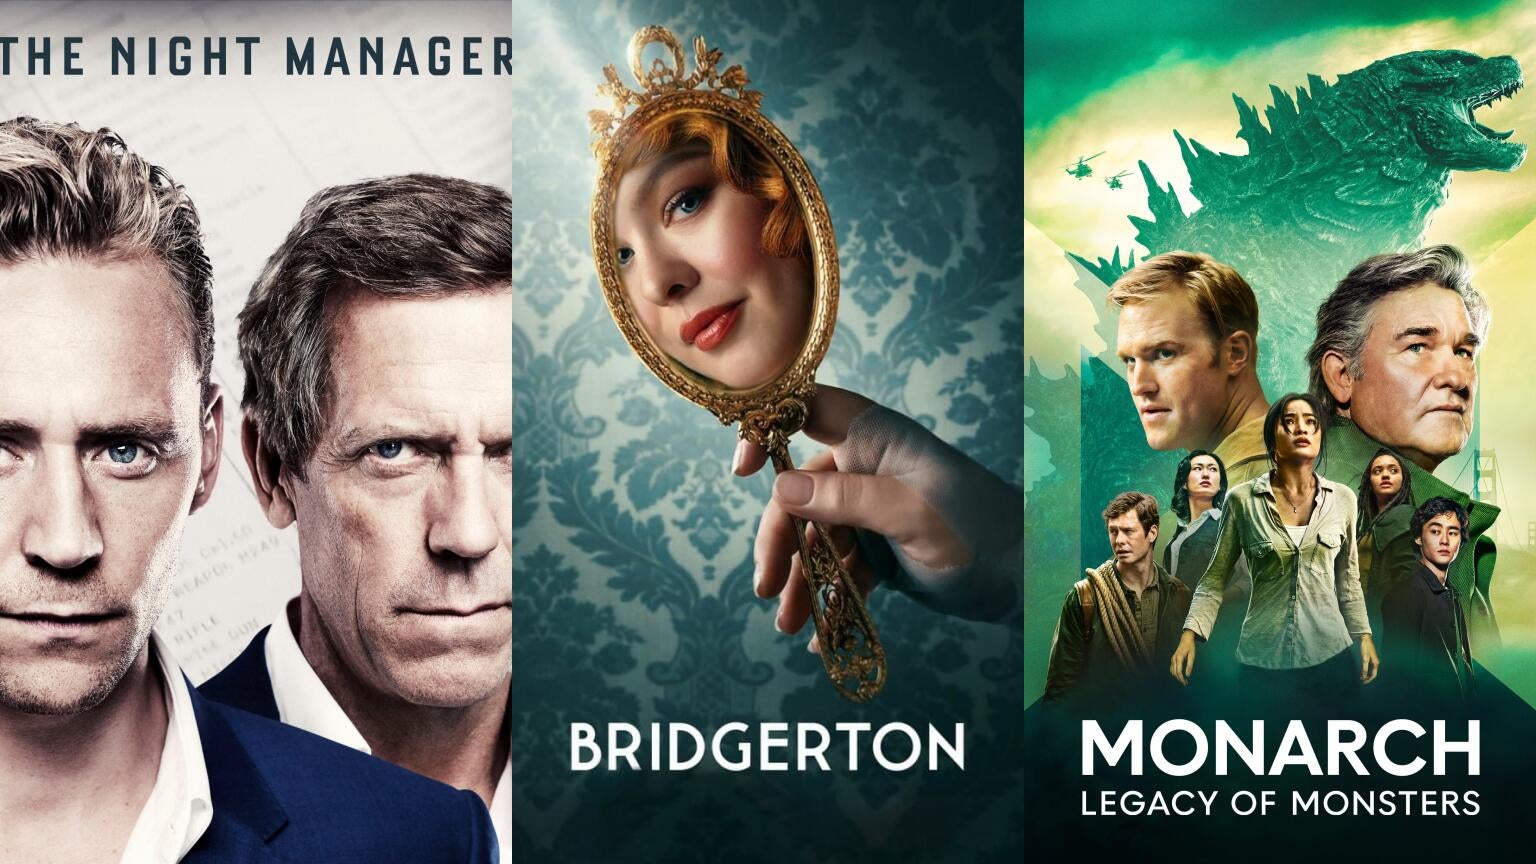 Posters for "The Night Manager," "Bridgerton," and "Monarch: Legacy of Monsters"